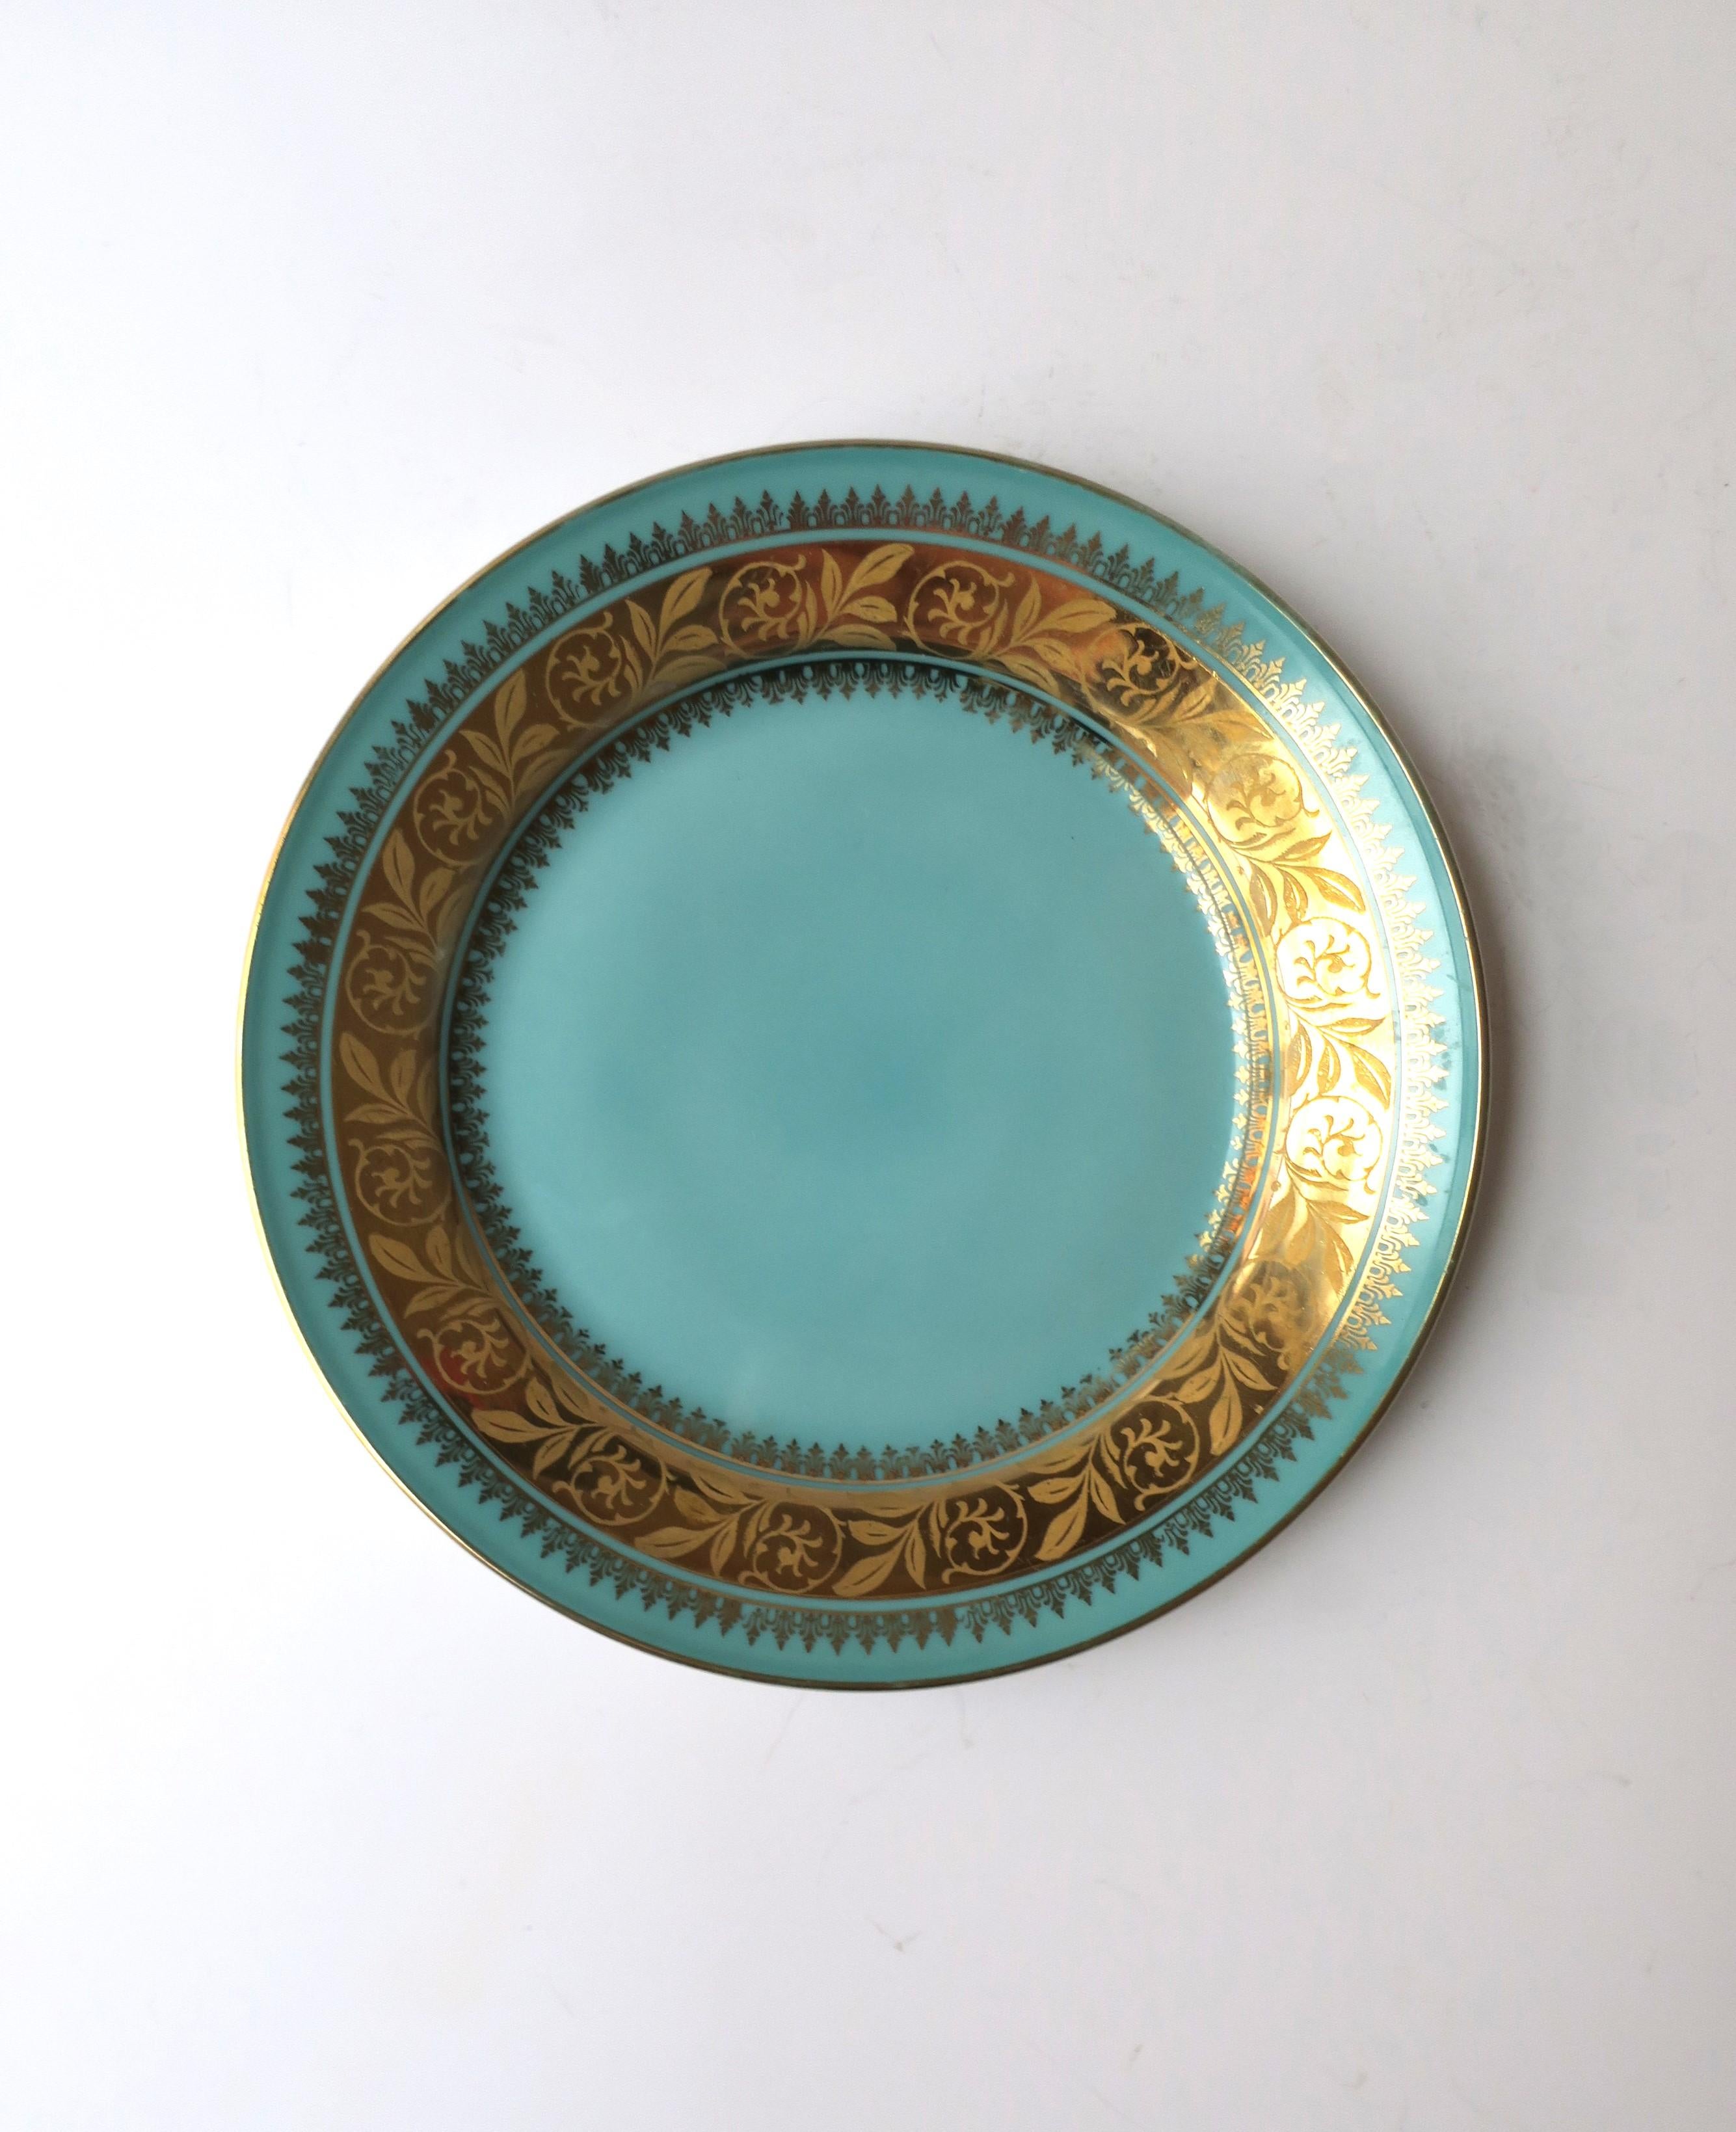 A German porcelain plate in a beautiful turquoise blue and gold, circa mid-20th century, Germany. Use to create or add to a table scape by mixing and matching (as demonstrated), use as a small plate for entertaining, etc., or use as wall art. Many